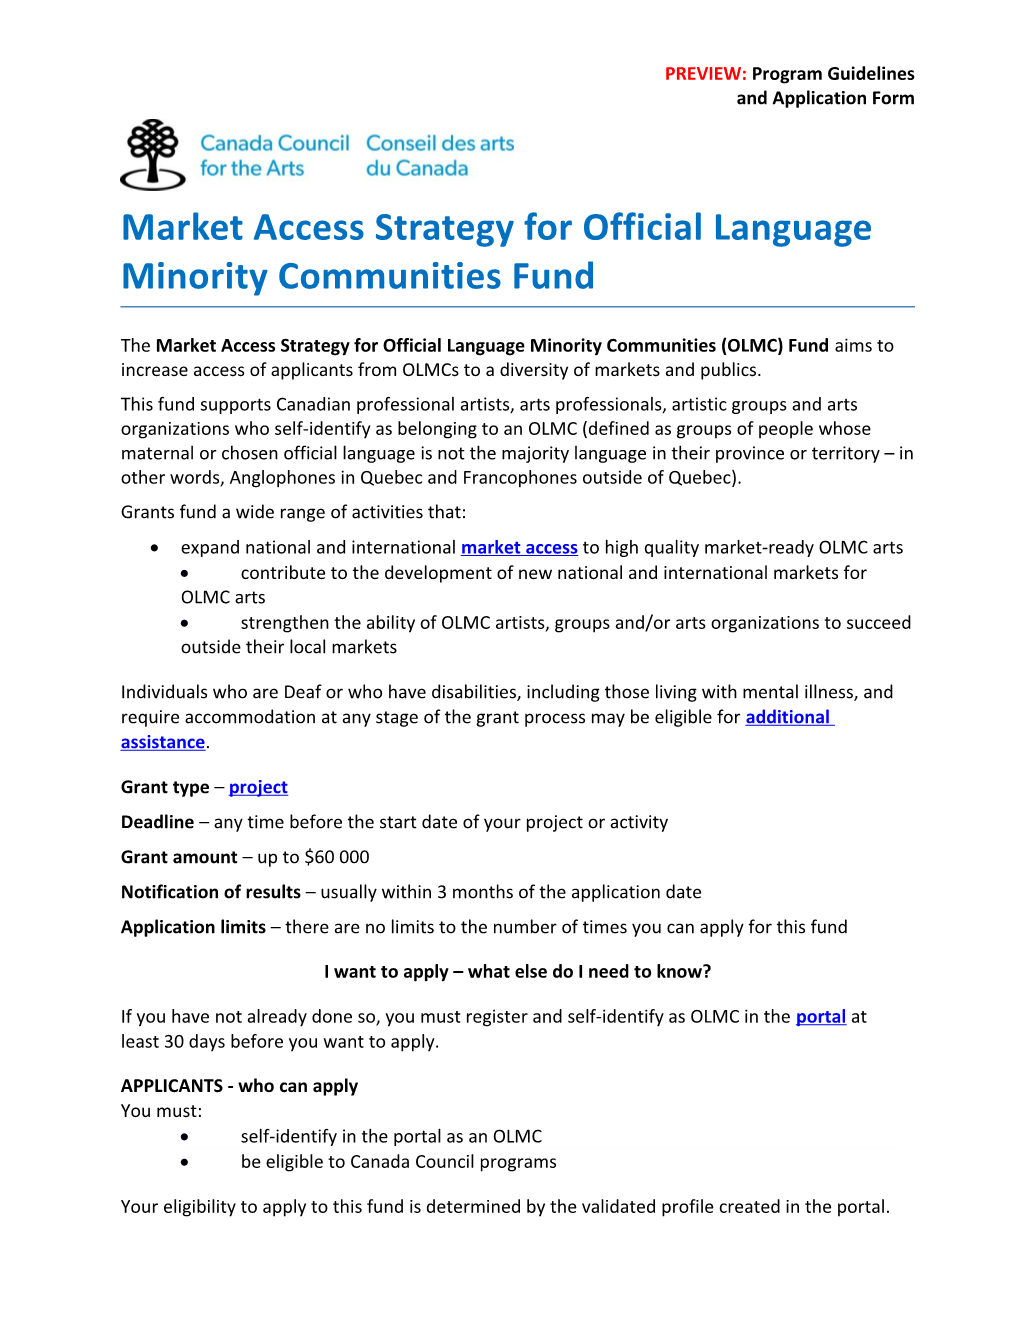 Market Access Strategy for Official Language Minority Communitiesfund